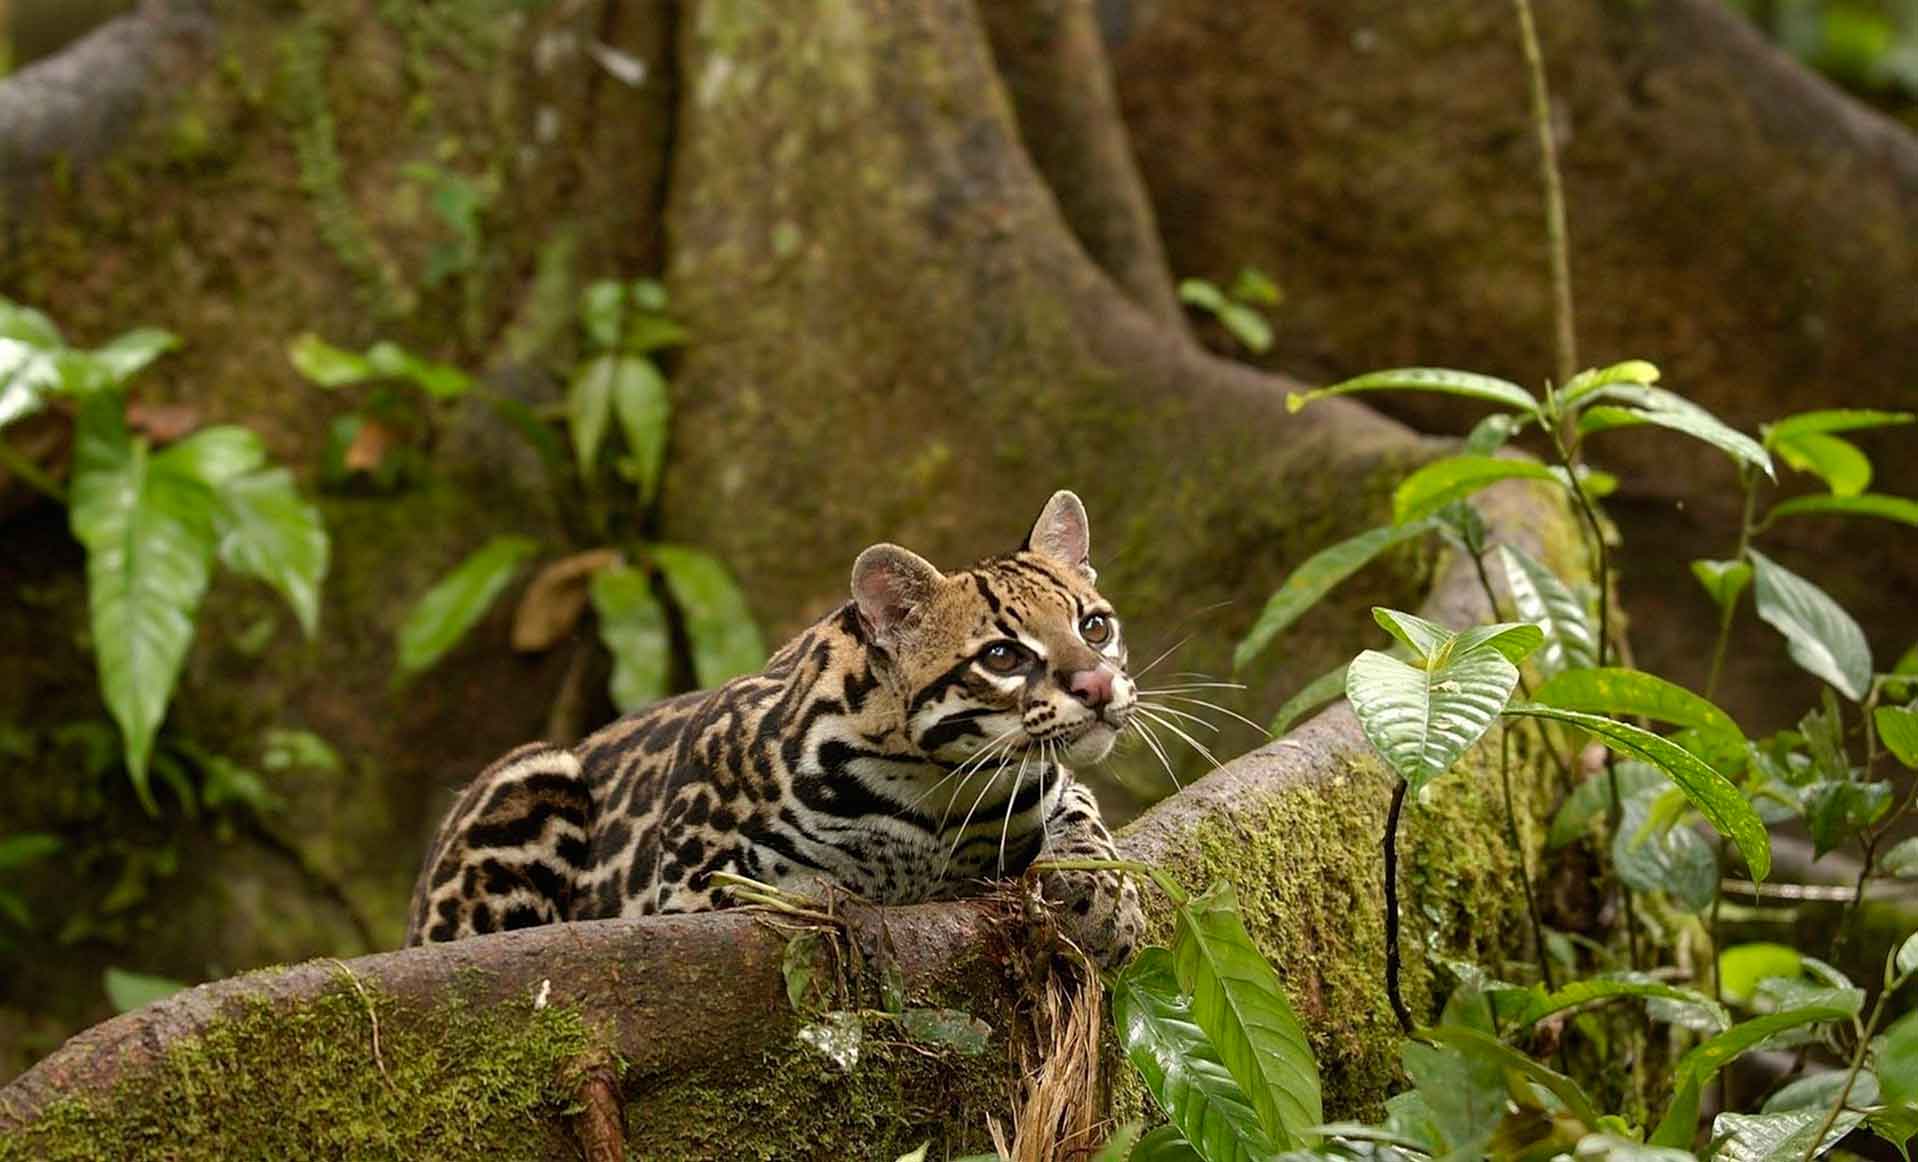 Ocelot at the foot of a large tree